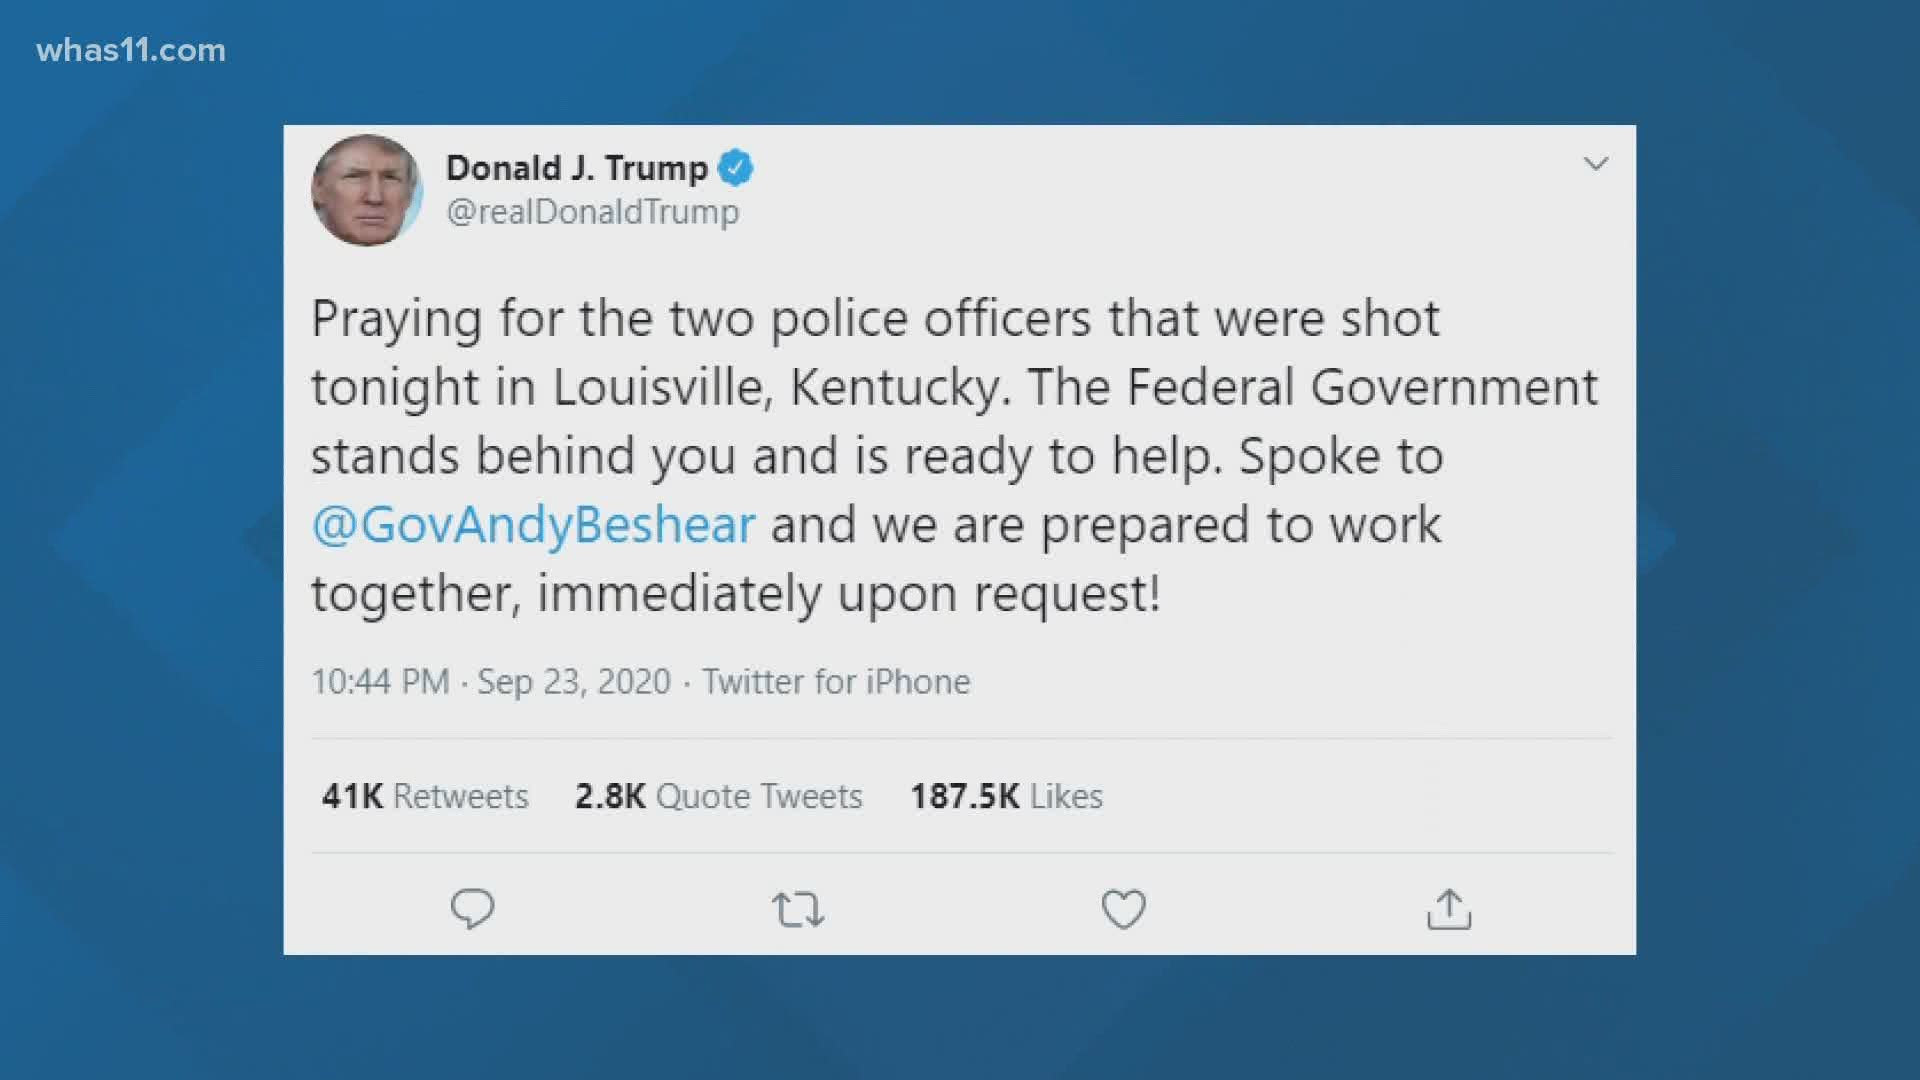 President Trump tweeted Gov. Beshear: "The Federal Government stands behind you and is ready to help" following the Breonna Taylor decision.